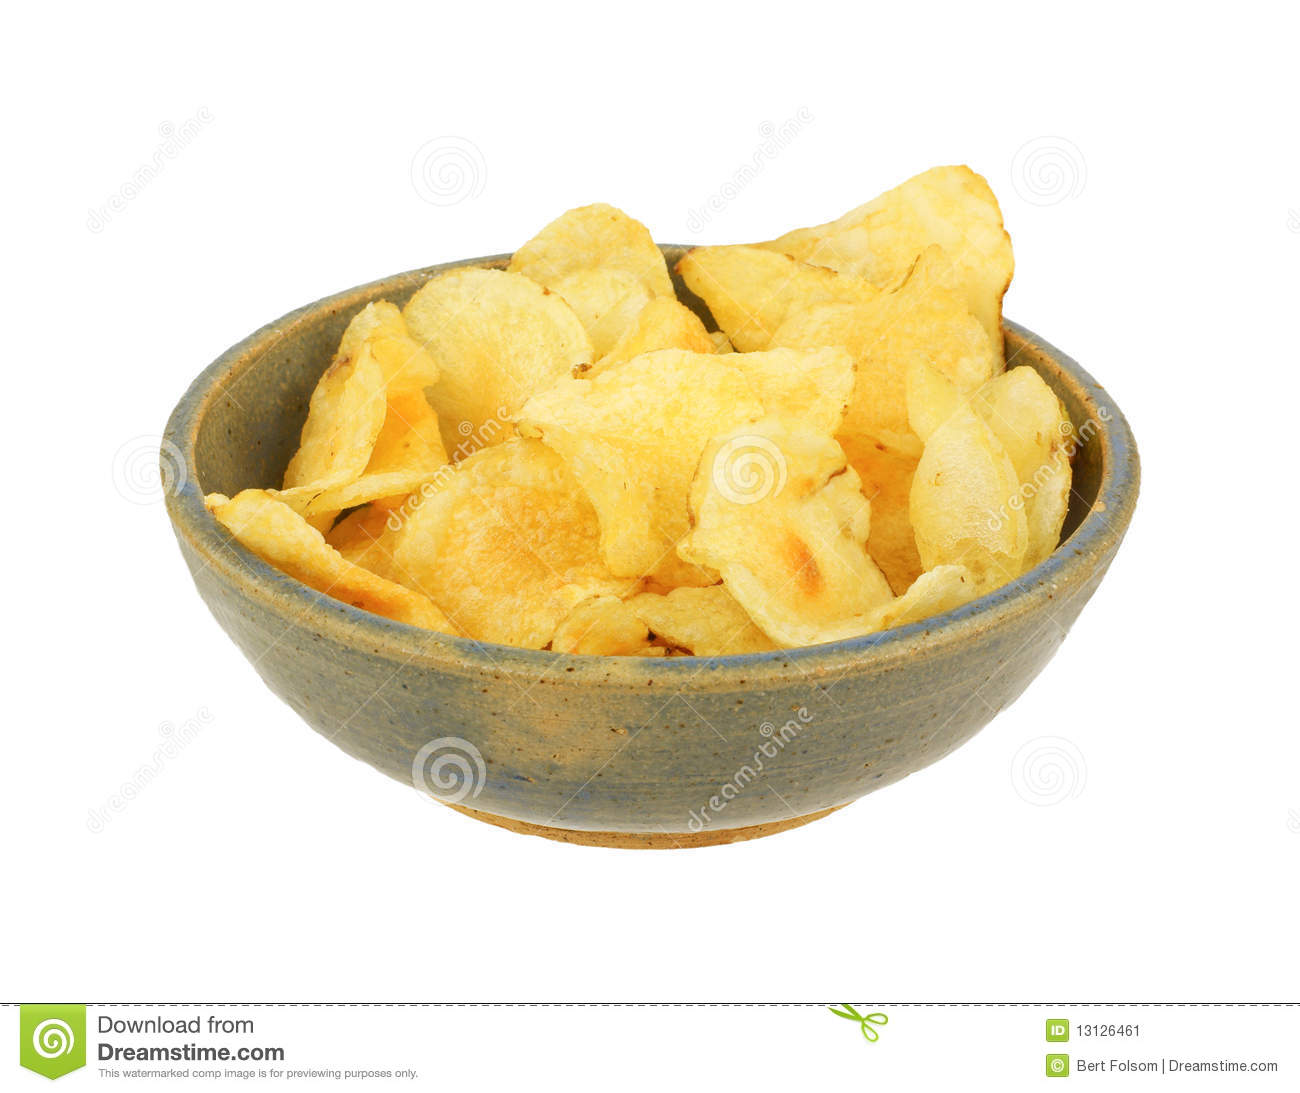     Plain Flavored Potato Chips In An Old Bowl Against A White Background